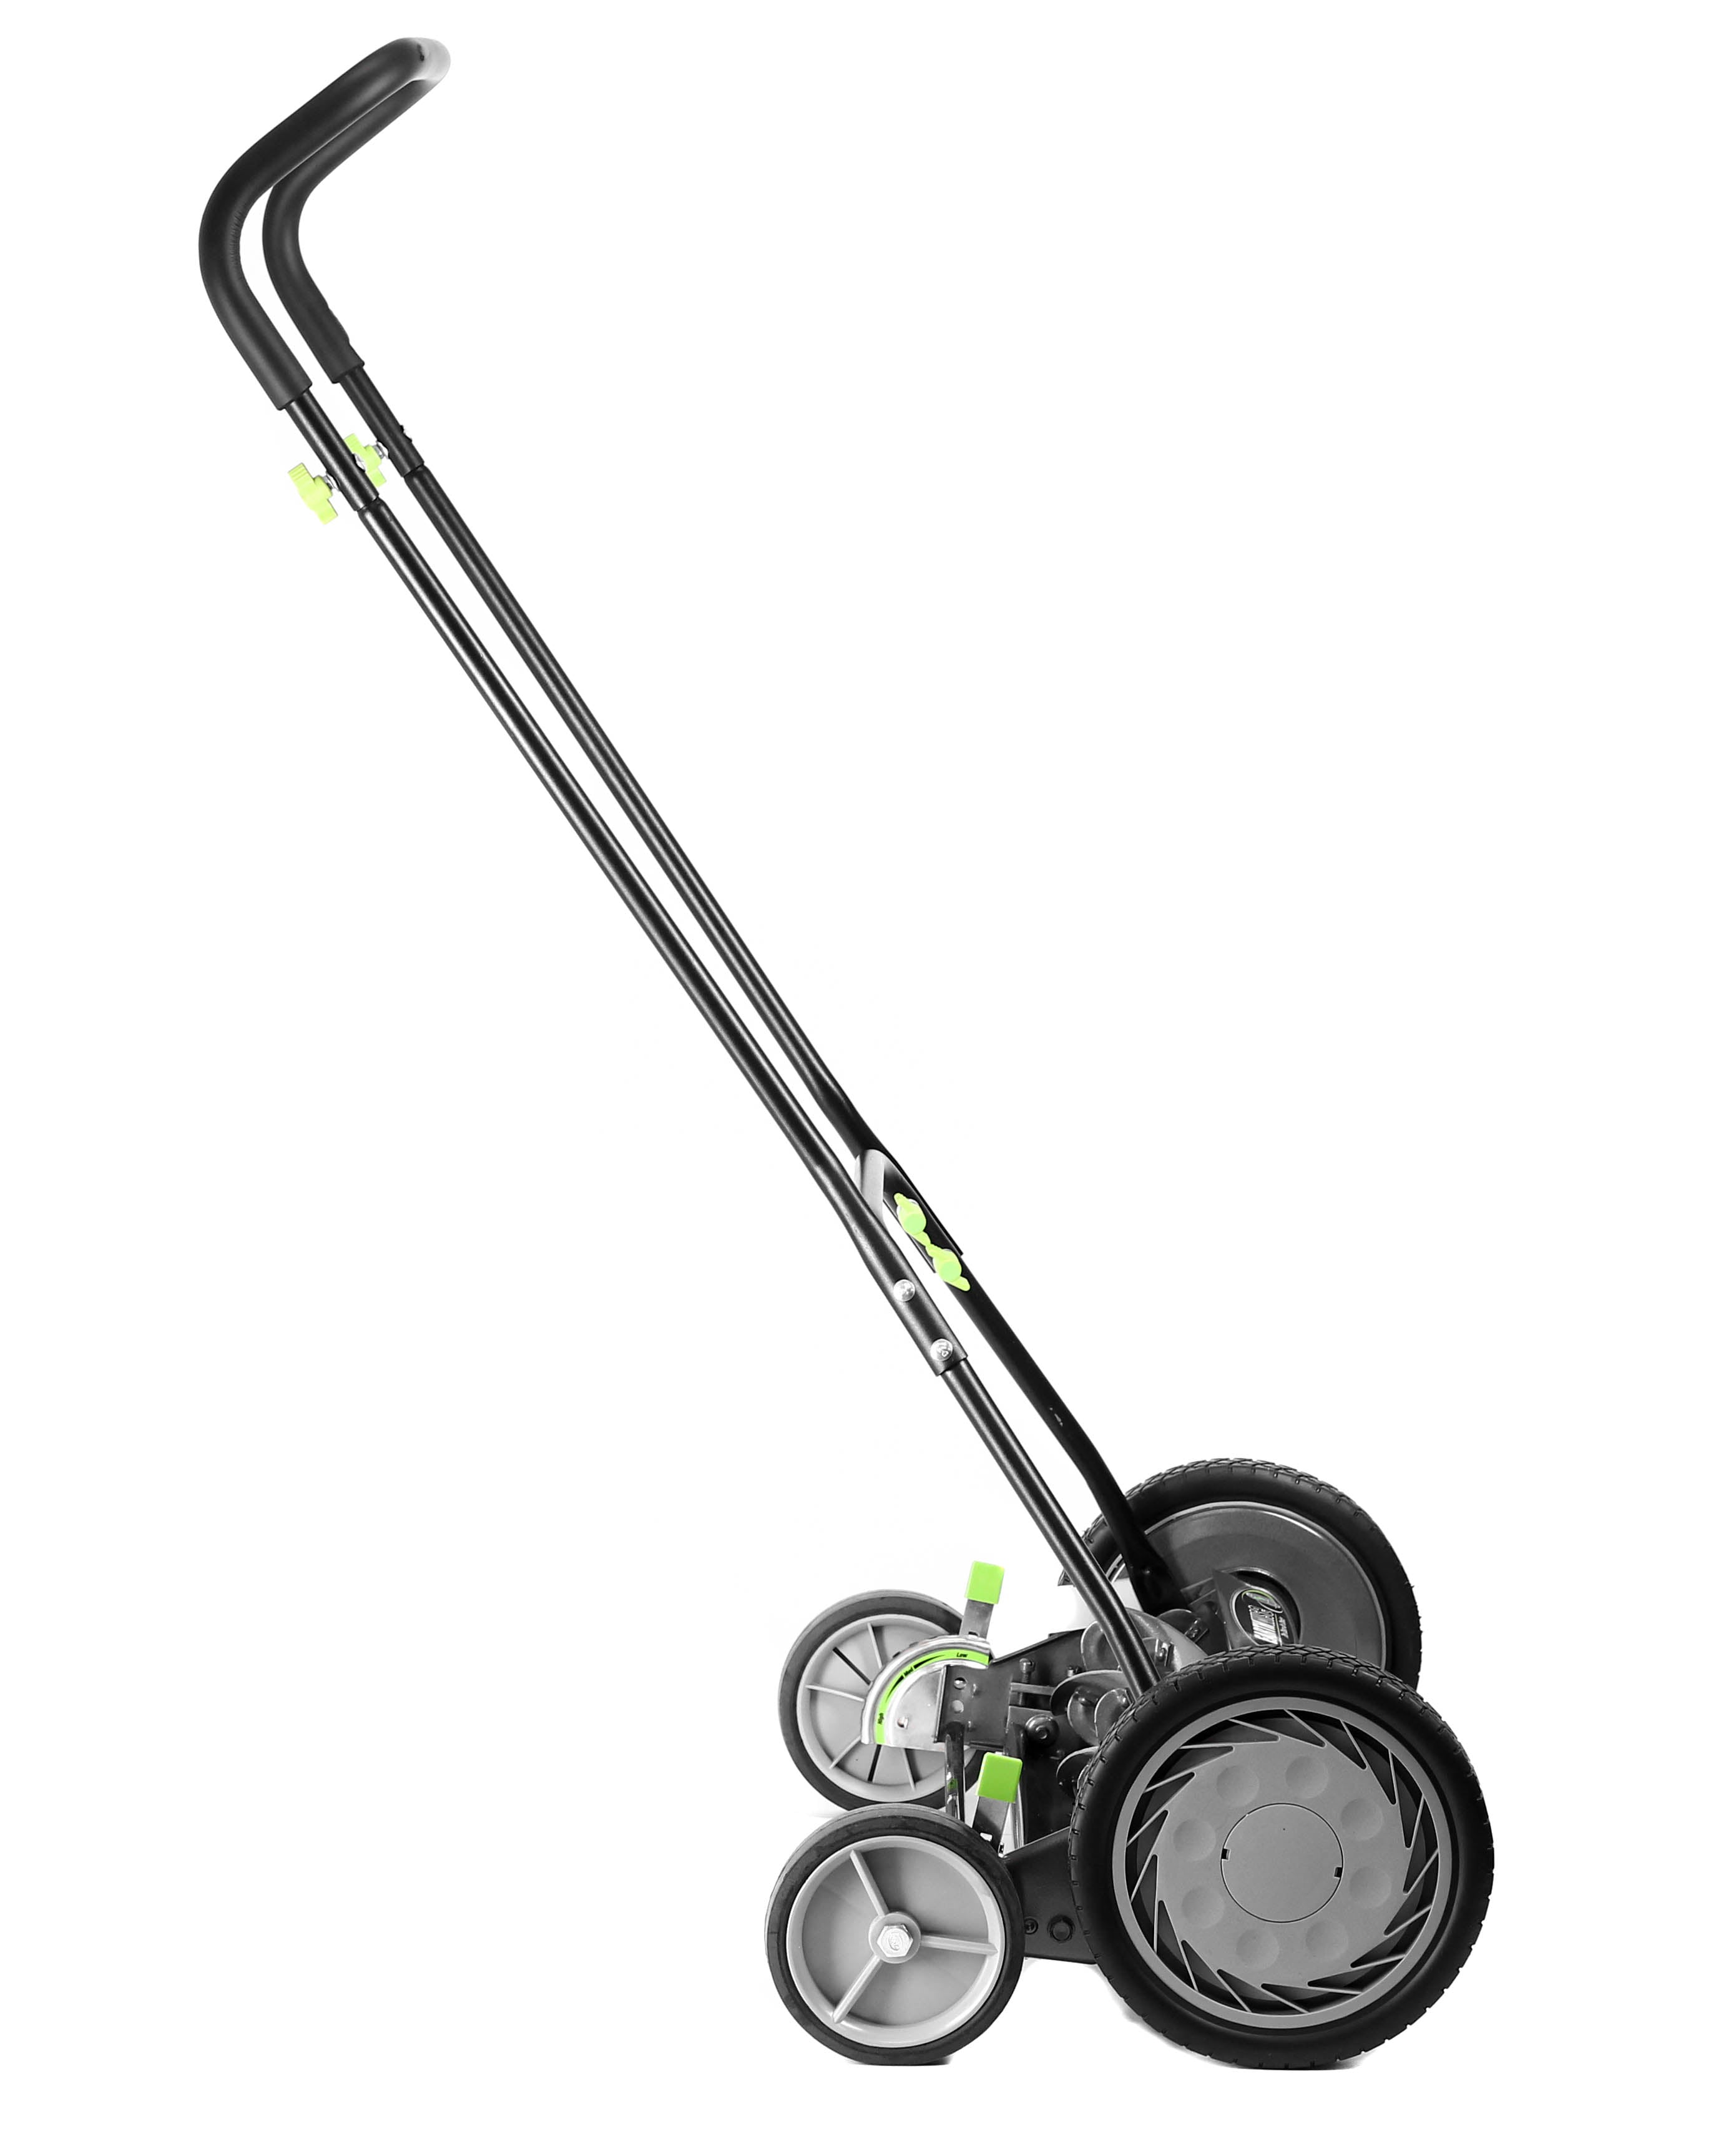 Earthwise Power Tools by ALM 20 Manual Reel Mower with Trailing Wheel –  American Lawn Mower Co. EST 1895